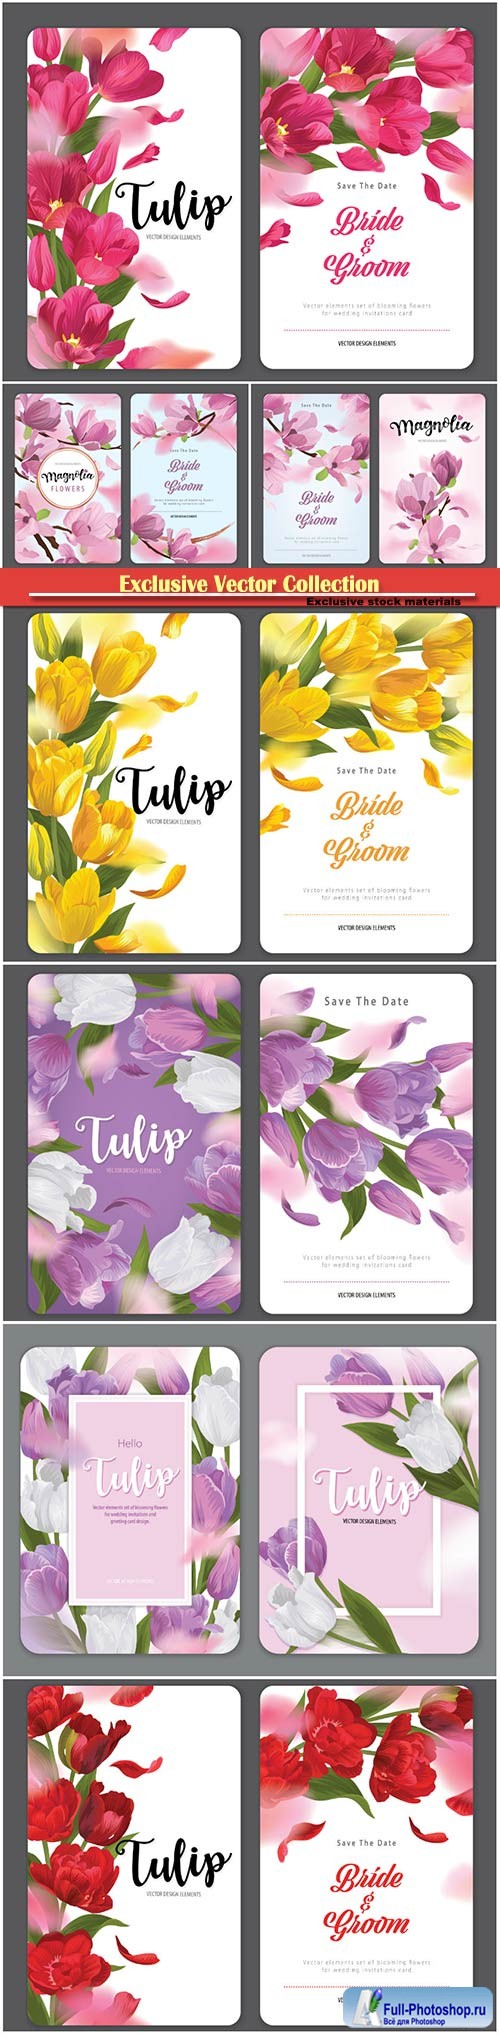 Vector elements set of flowers for wedding invitations card